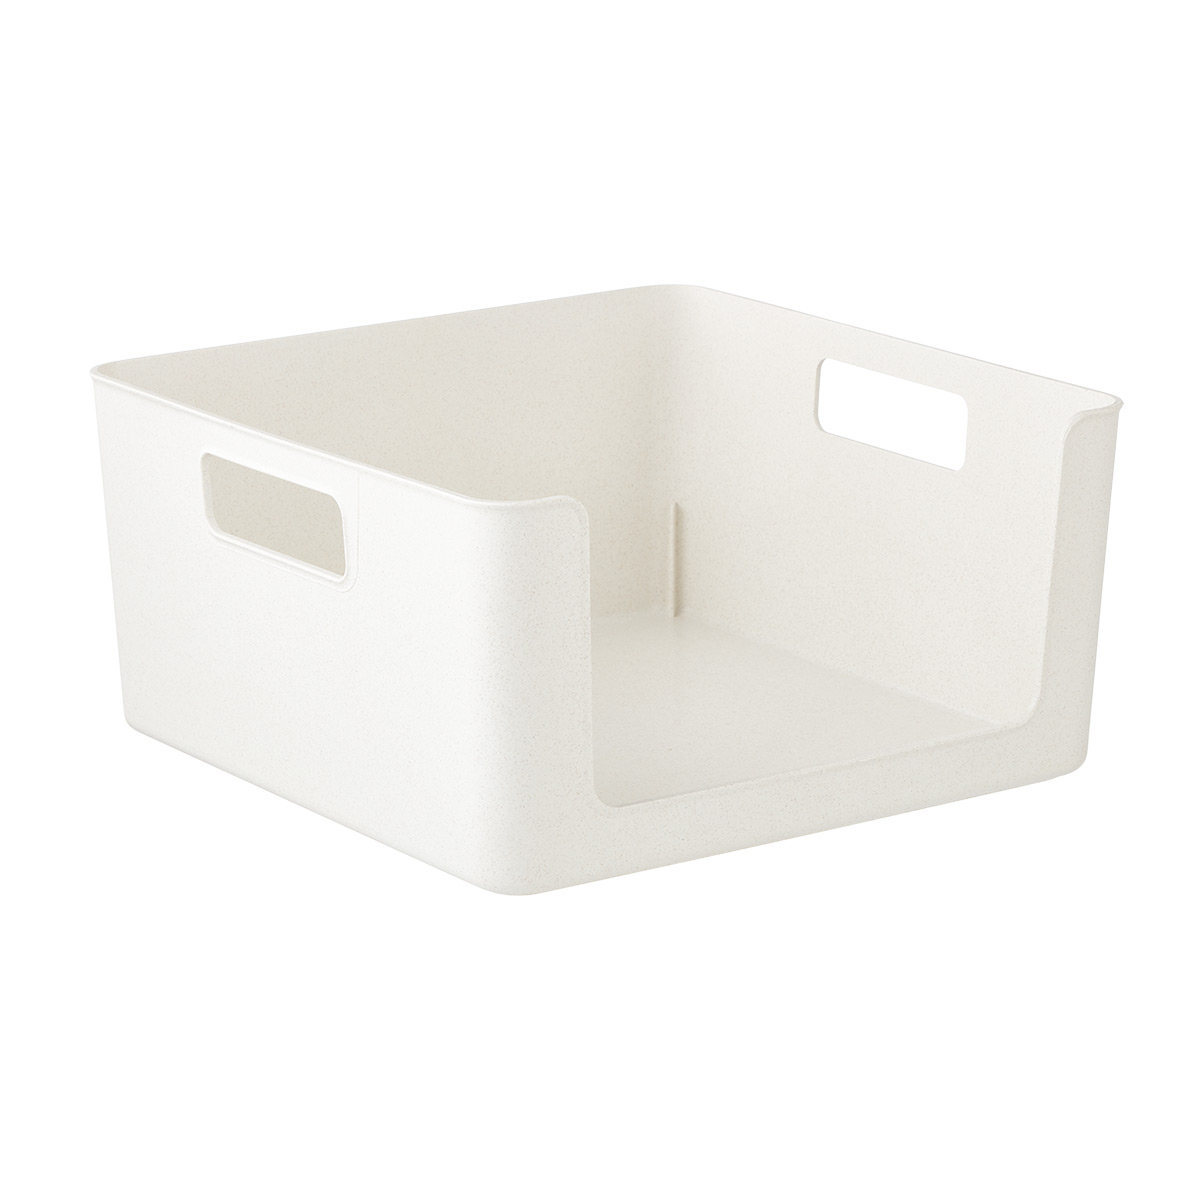 https://www.containerstore.com/catalogimages/451701/10088769_RO_Eco-Friendly_Open_Front_.jpg